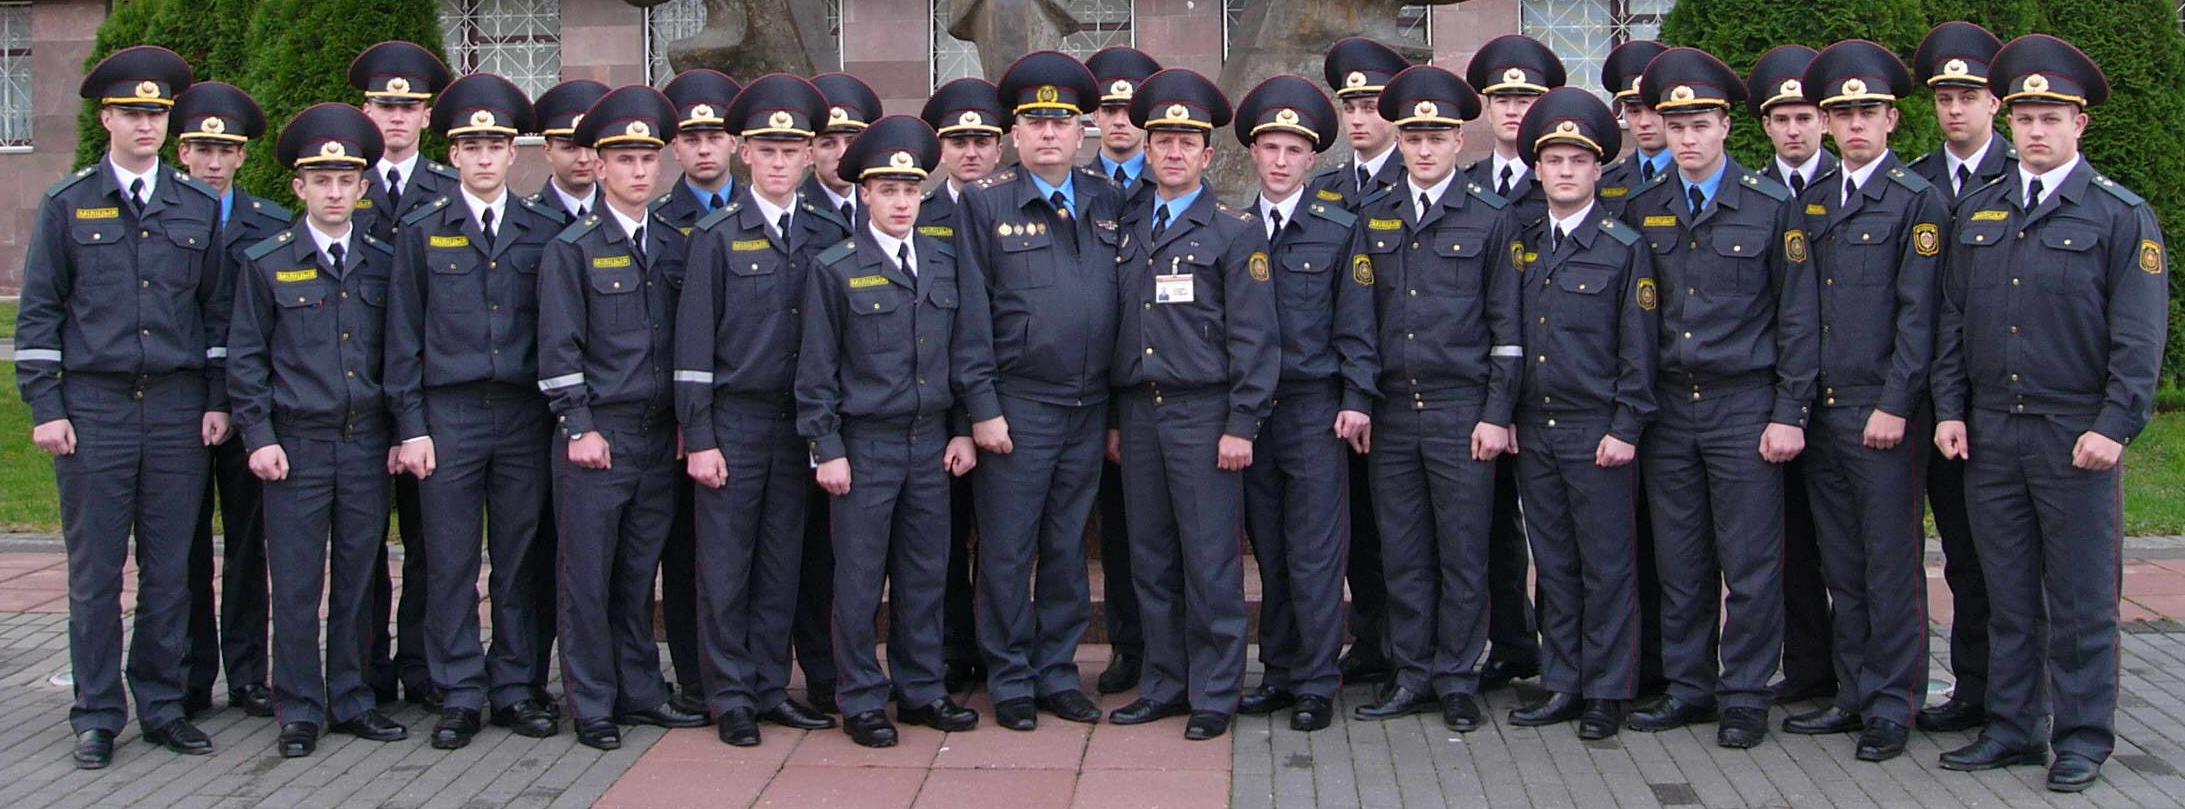 Belarusian authorities have concerns about loyalty of law enforcement